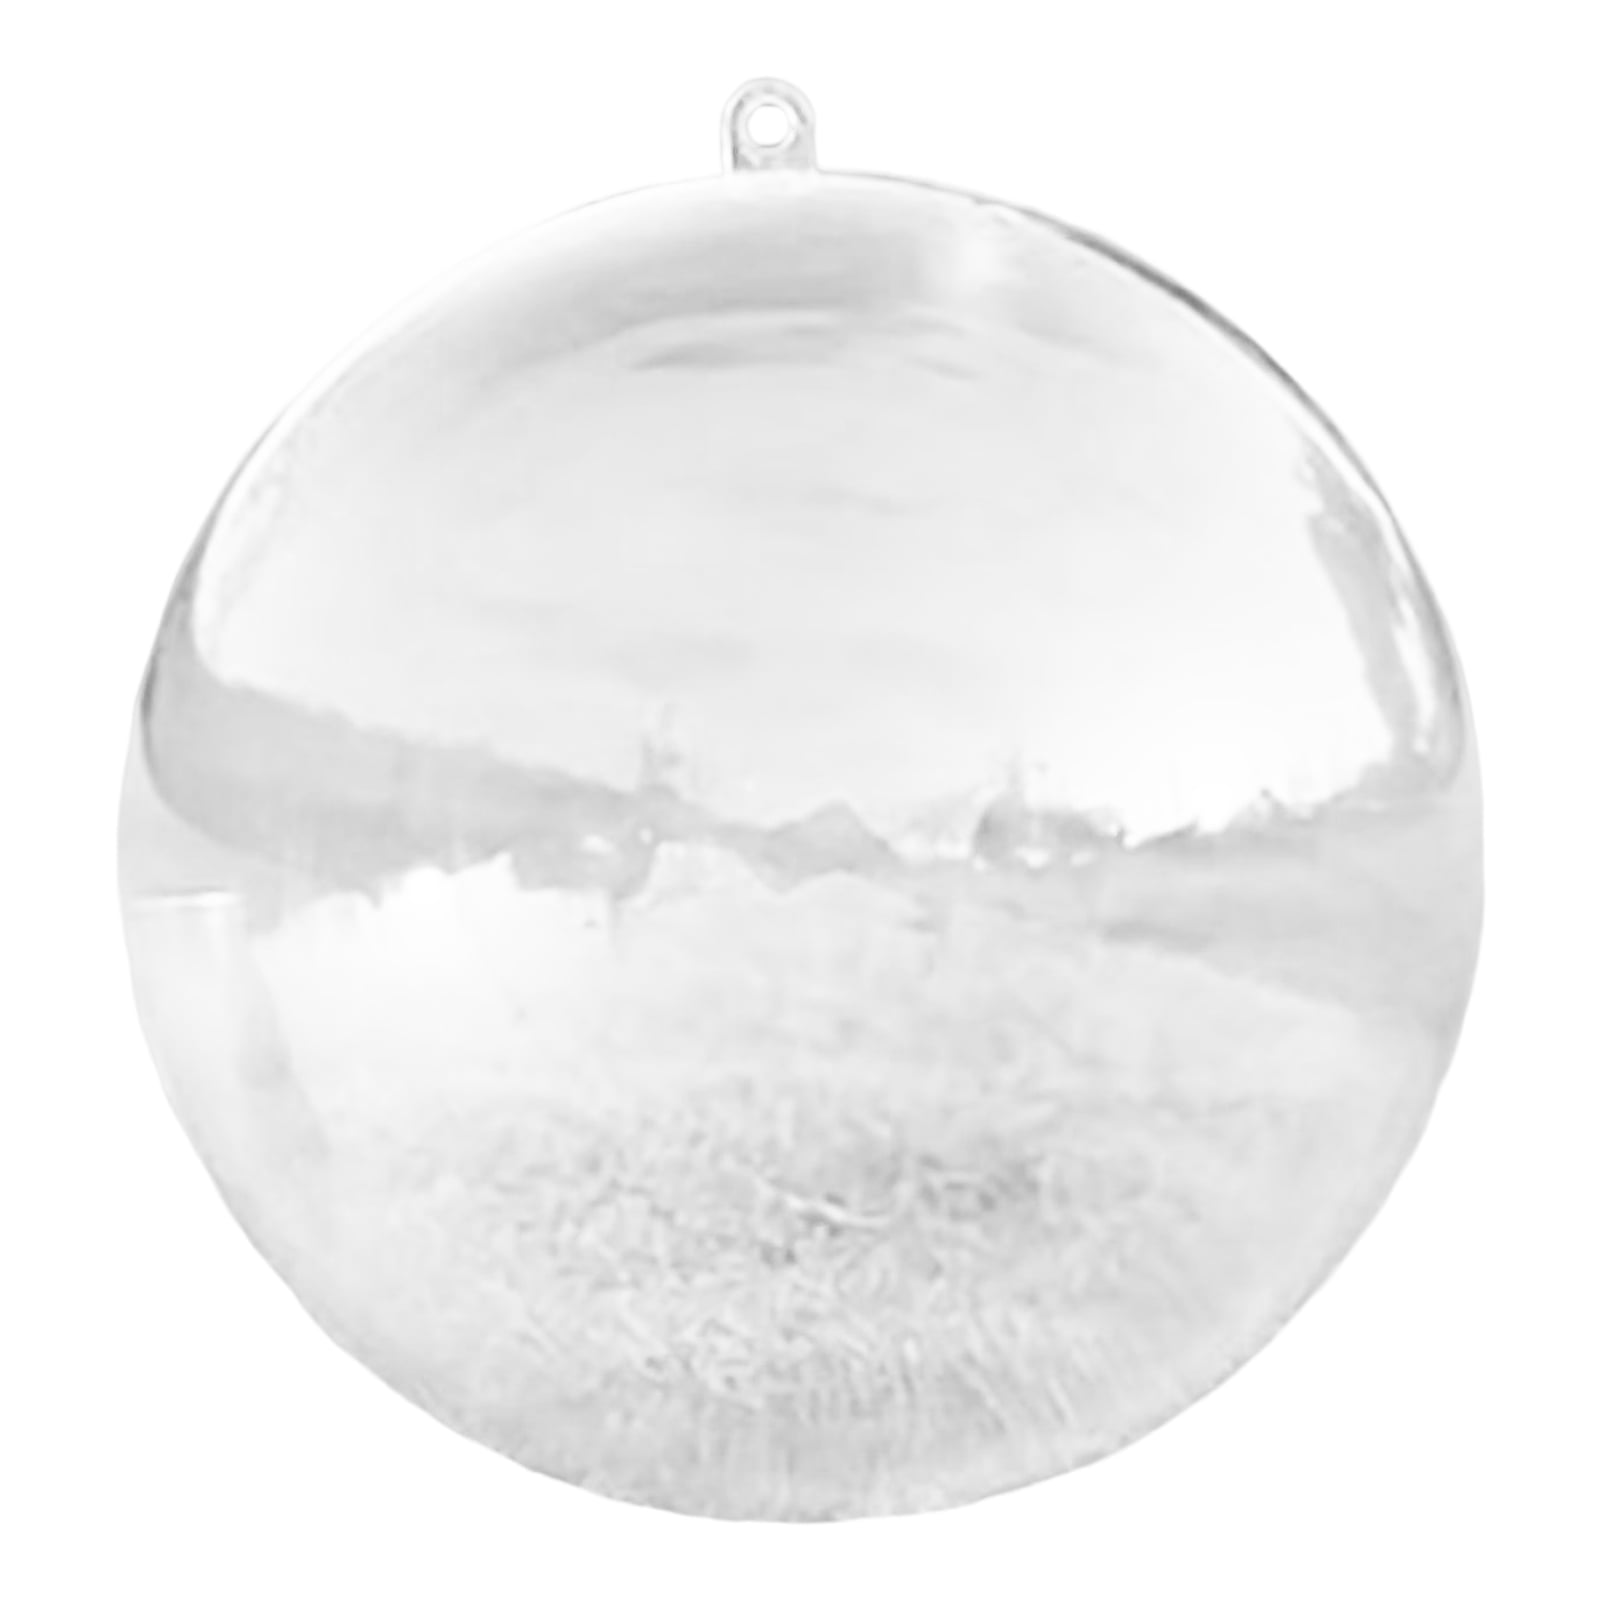 4~16cm Christmas Hanging Clear Plastic Fillable Ornaments Ball Plastic Ball  Transparent Flower Ball Festival Wedding Party DecorationsbyDHL From  The_one, $0.43